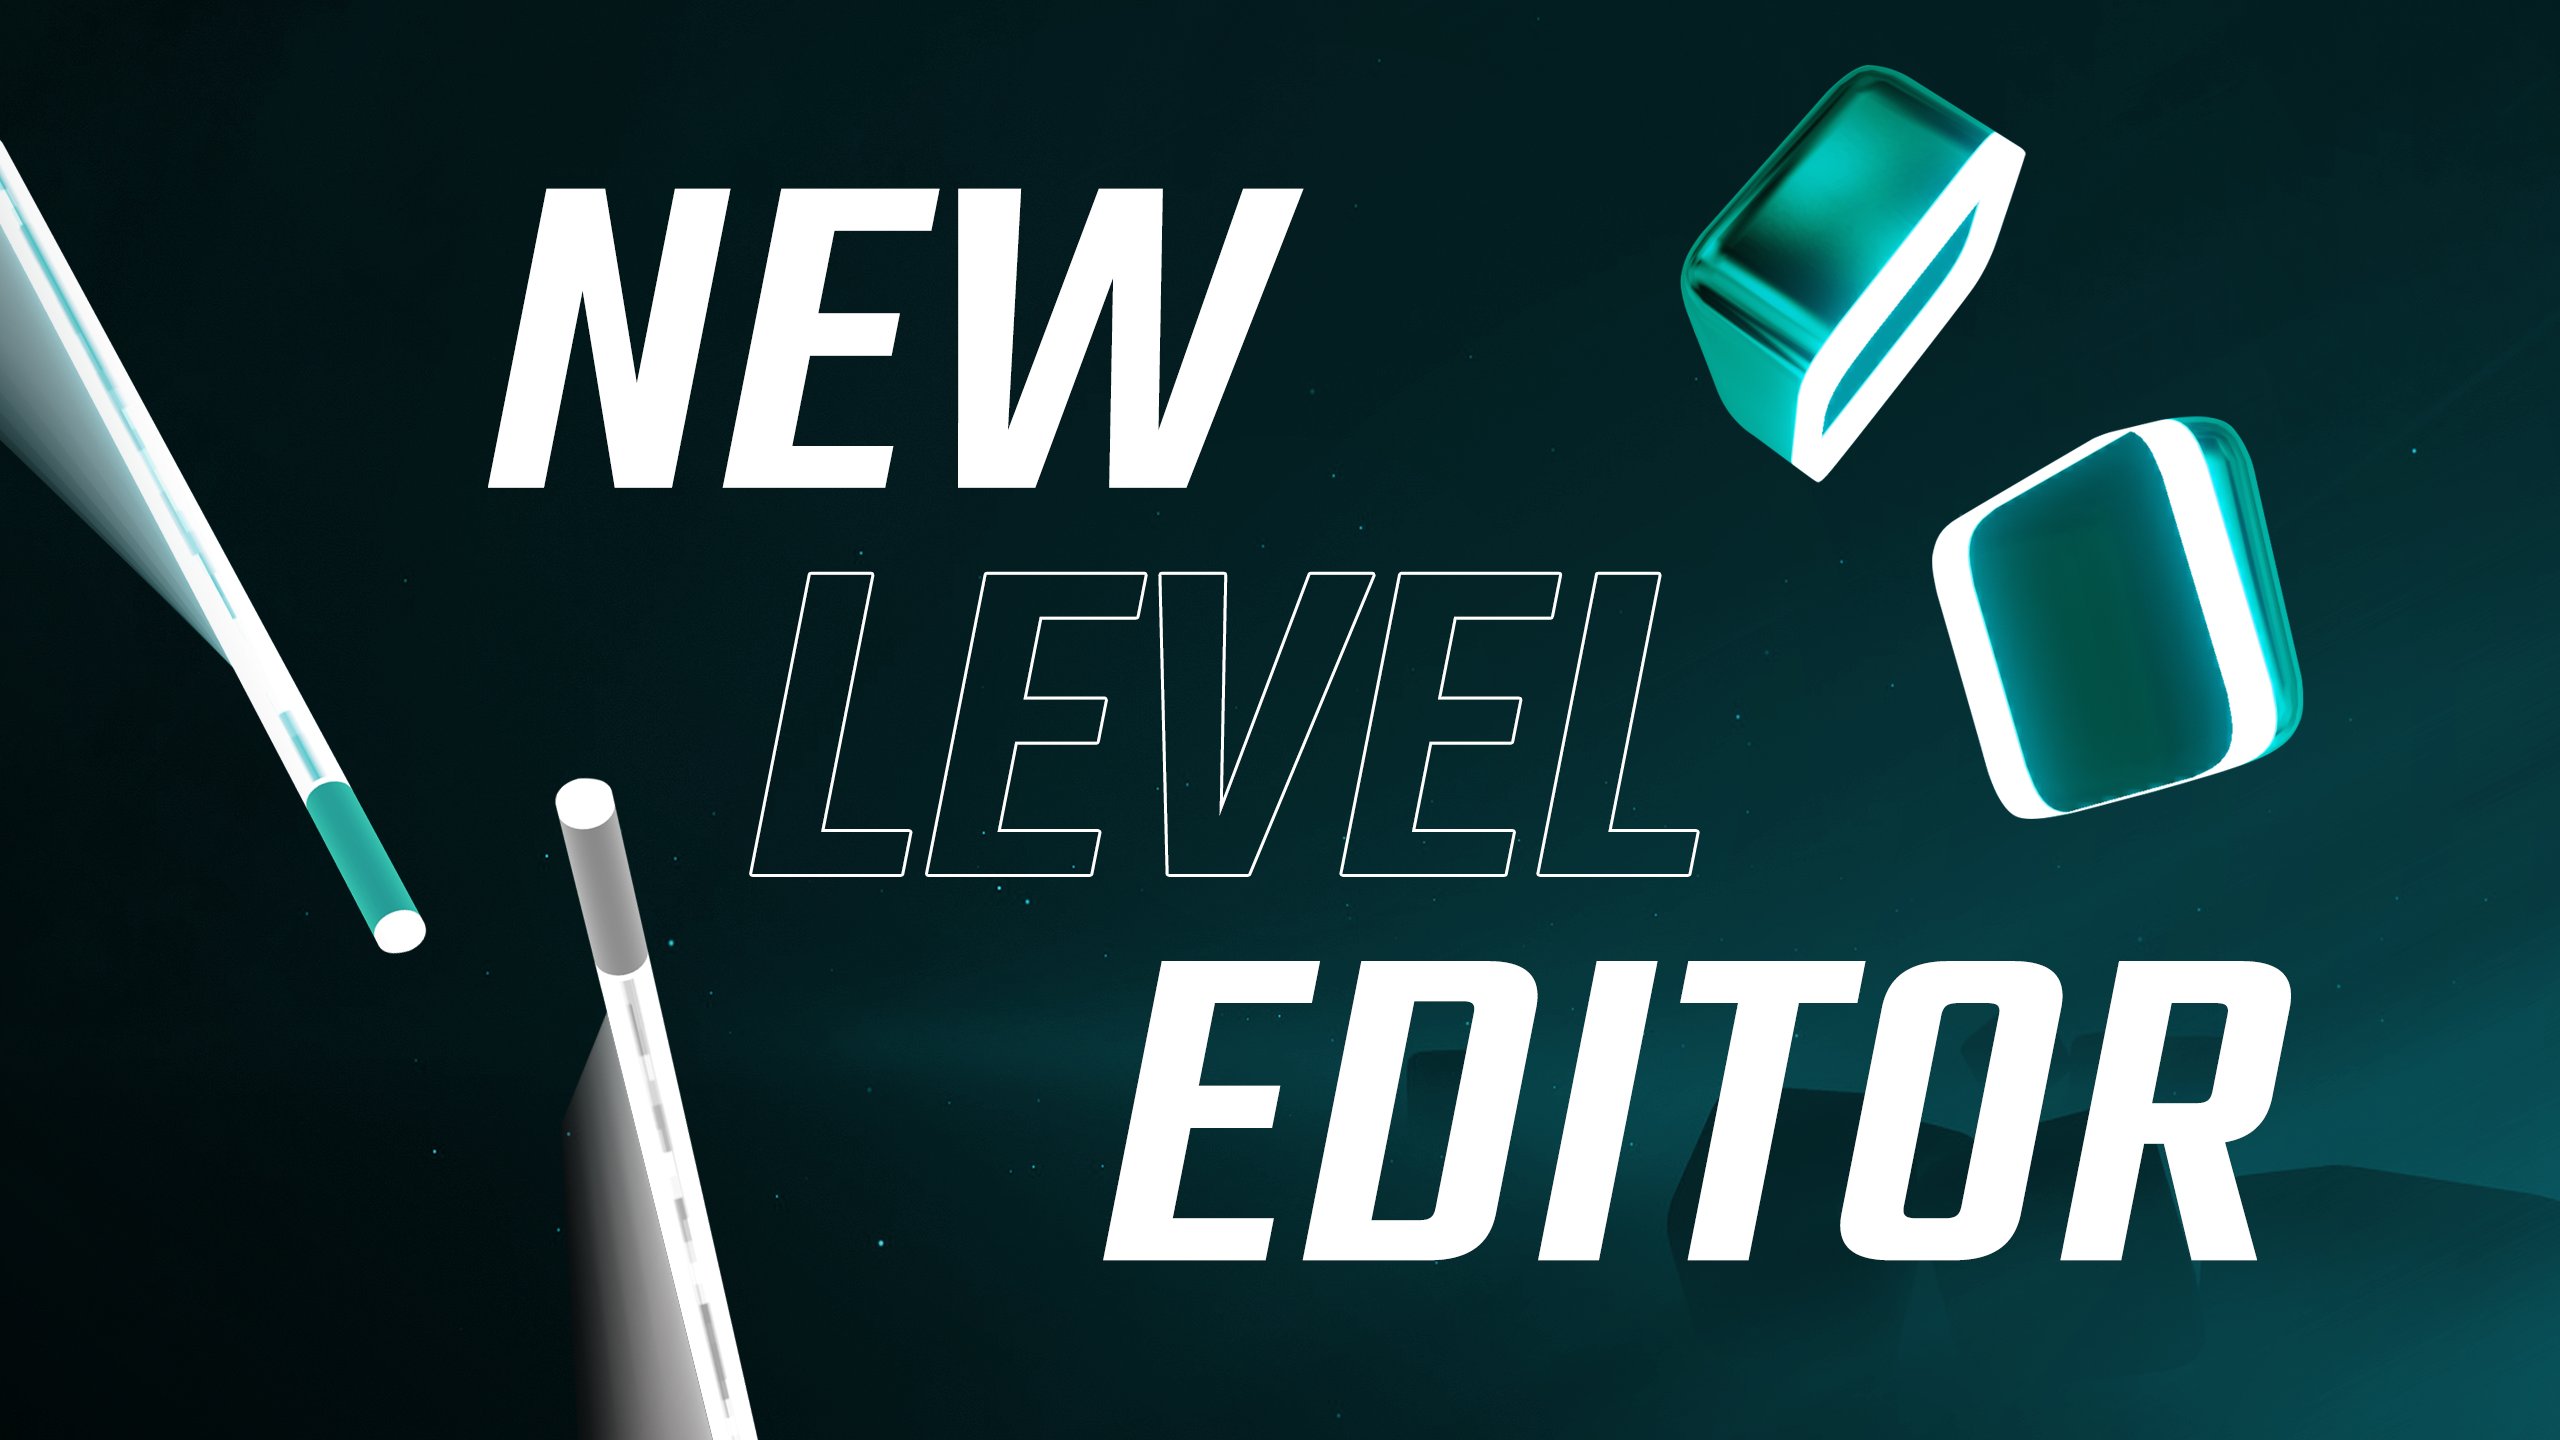 Hele tiden Stramme dæk Beat Saber on Twitter: "Calling all PC players! 🖥 Our new Level Editor  (beta) is ready to download for Steam and Oculus PC. Interested in  beatmapping? Check the Beat Saber Main Menu